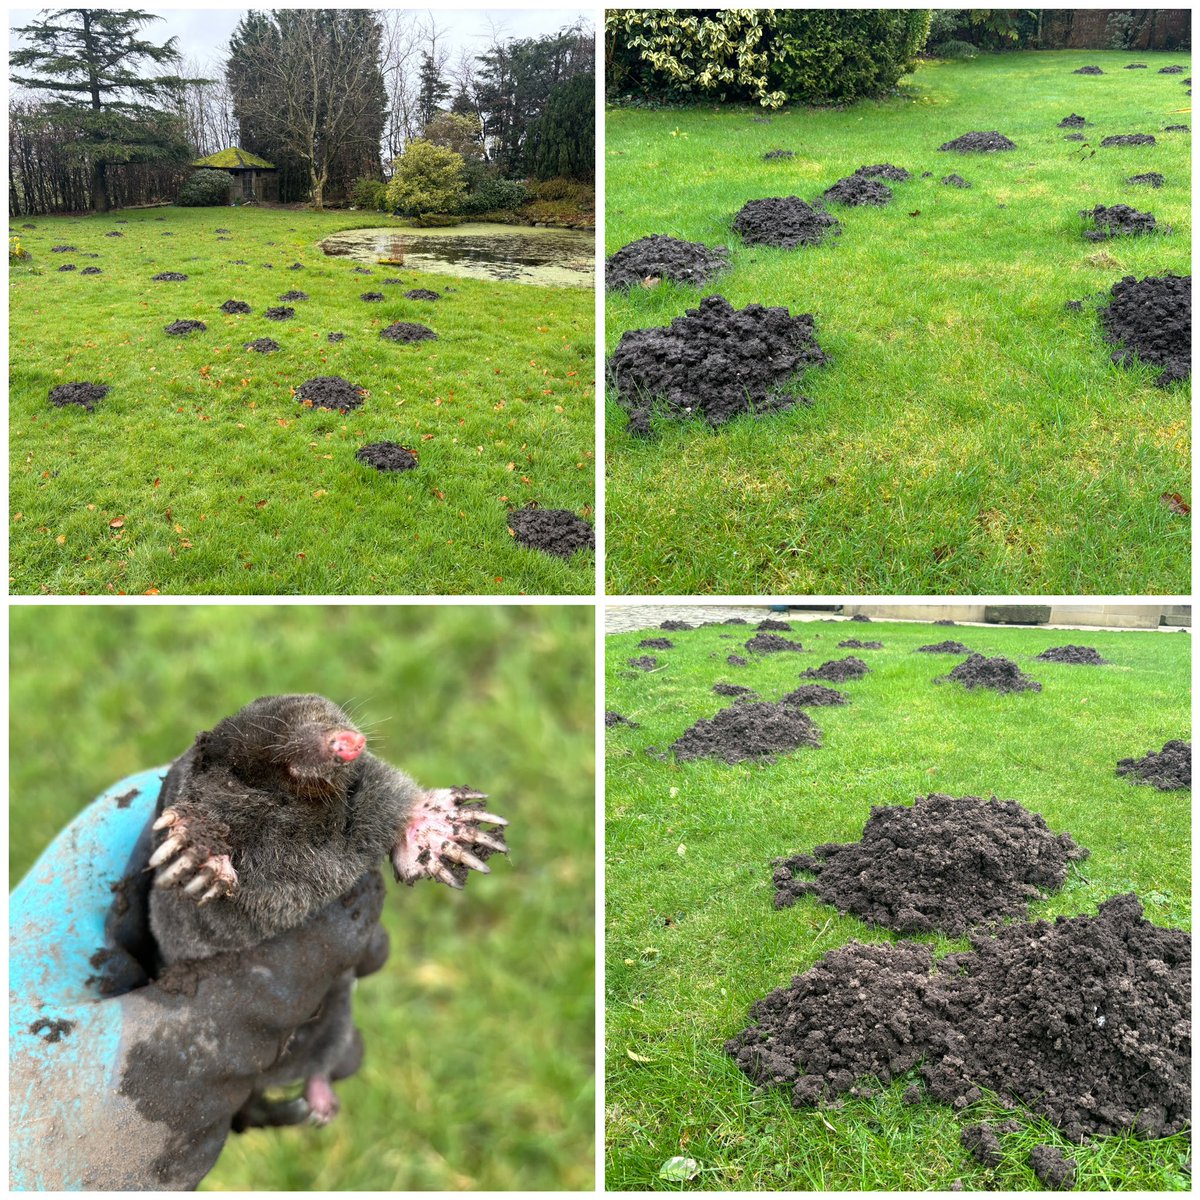 Get in touch today for professional mole control.
moleandwasp.com
07474956940
#rossendale #pendle #pennines #whalley #ribblevalley #hyndburn #craven #calderdale #lancashire #yorkshire